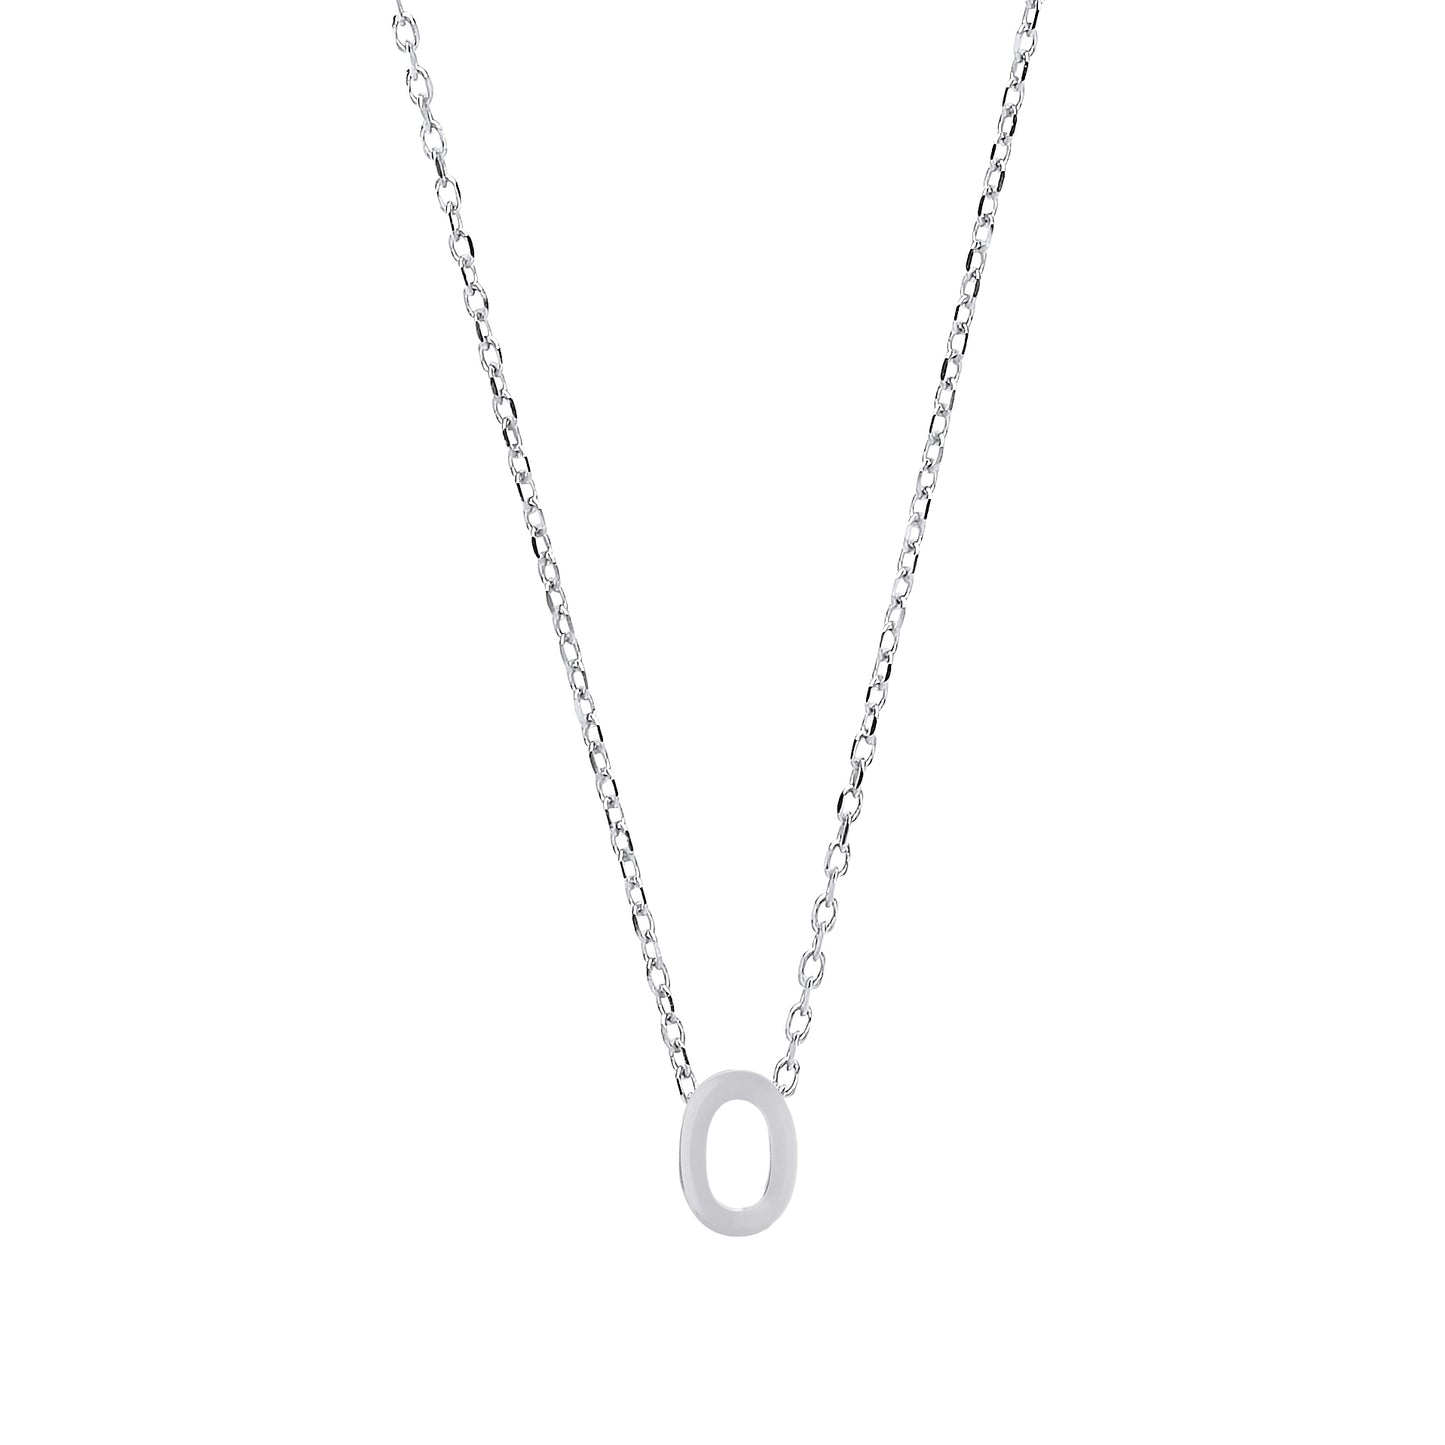 Silver  Letter O Initial Pendant Necklace 18 inch - GIN4O